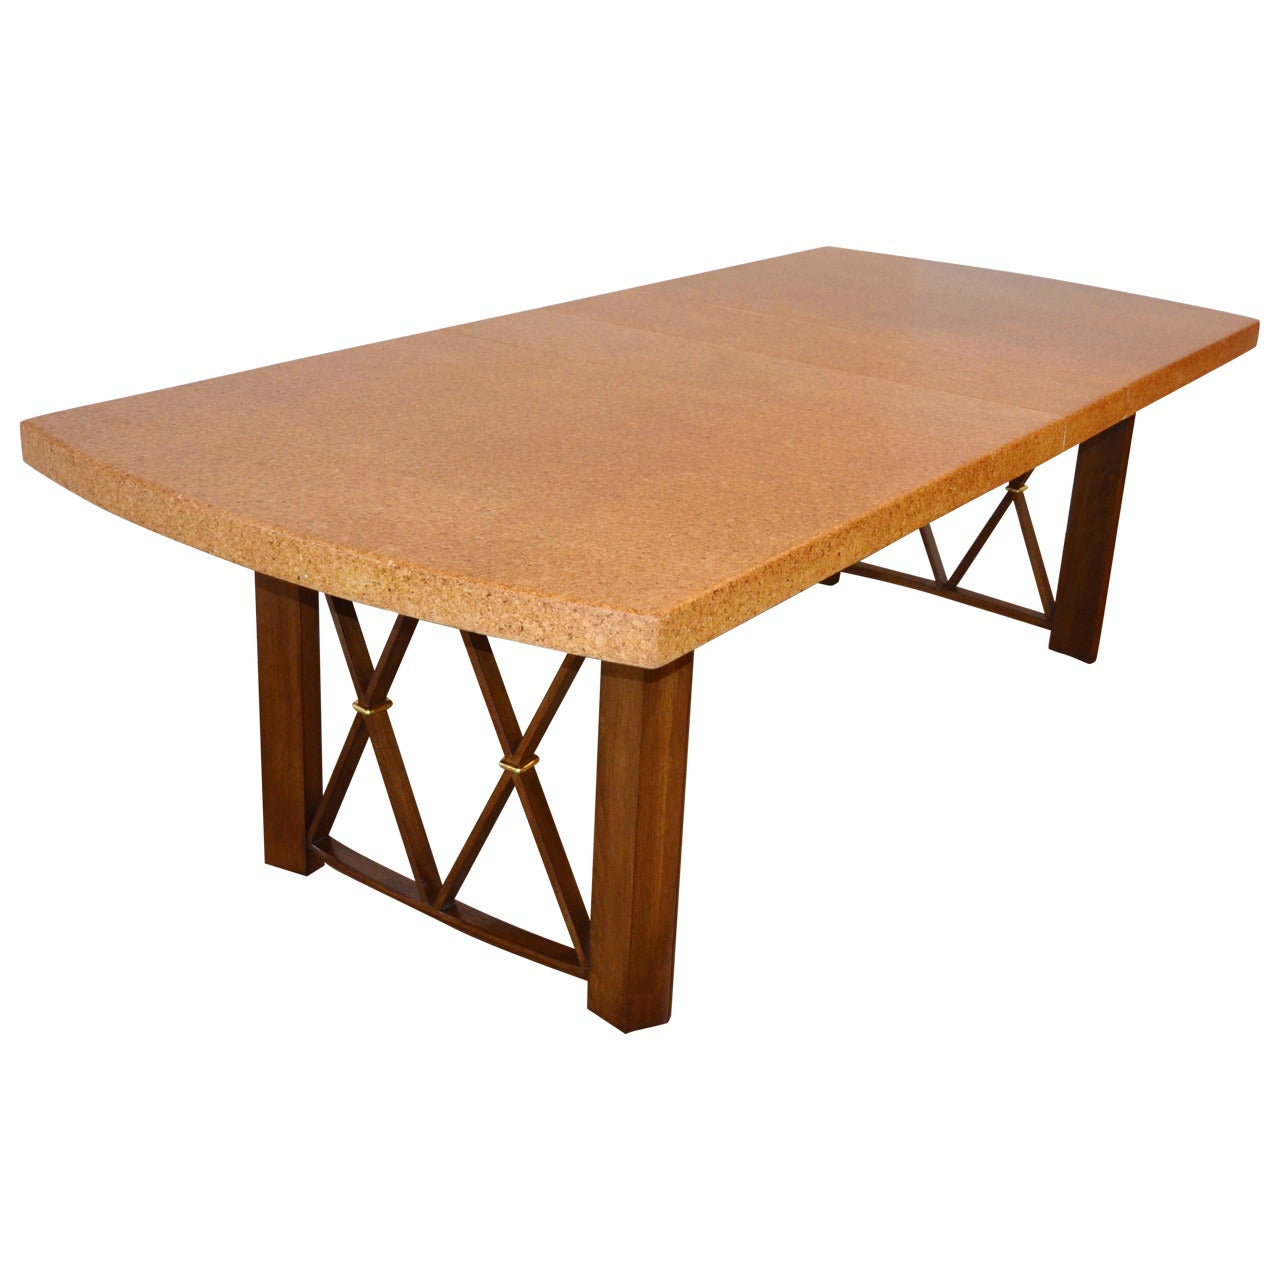 Paul Frankl's Cork, Walnut and Brass Dining Table for Johnson Furniture Co.